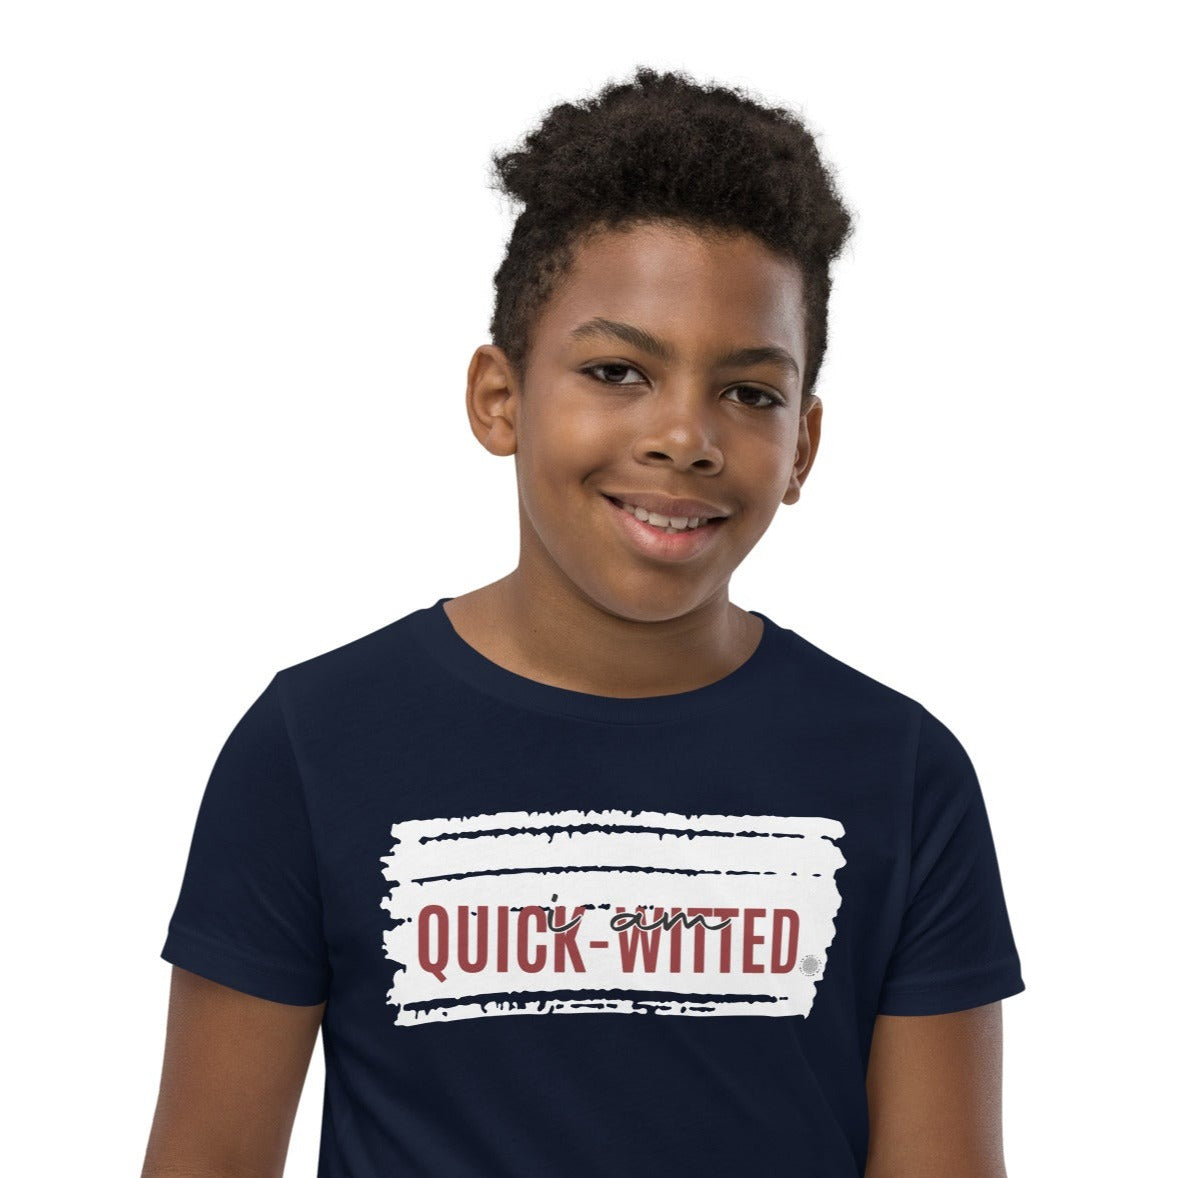 I Am Quick-witted Youth T-Shirt navy